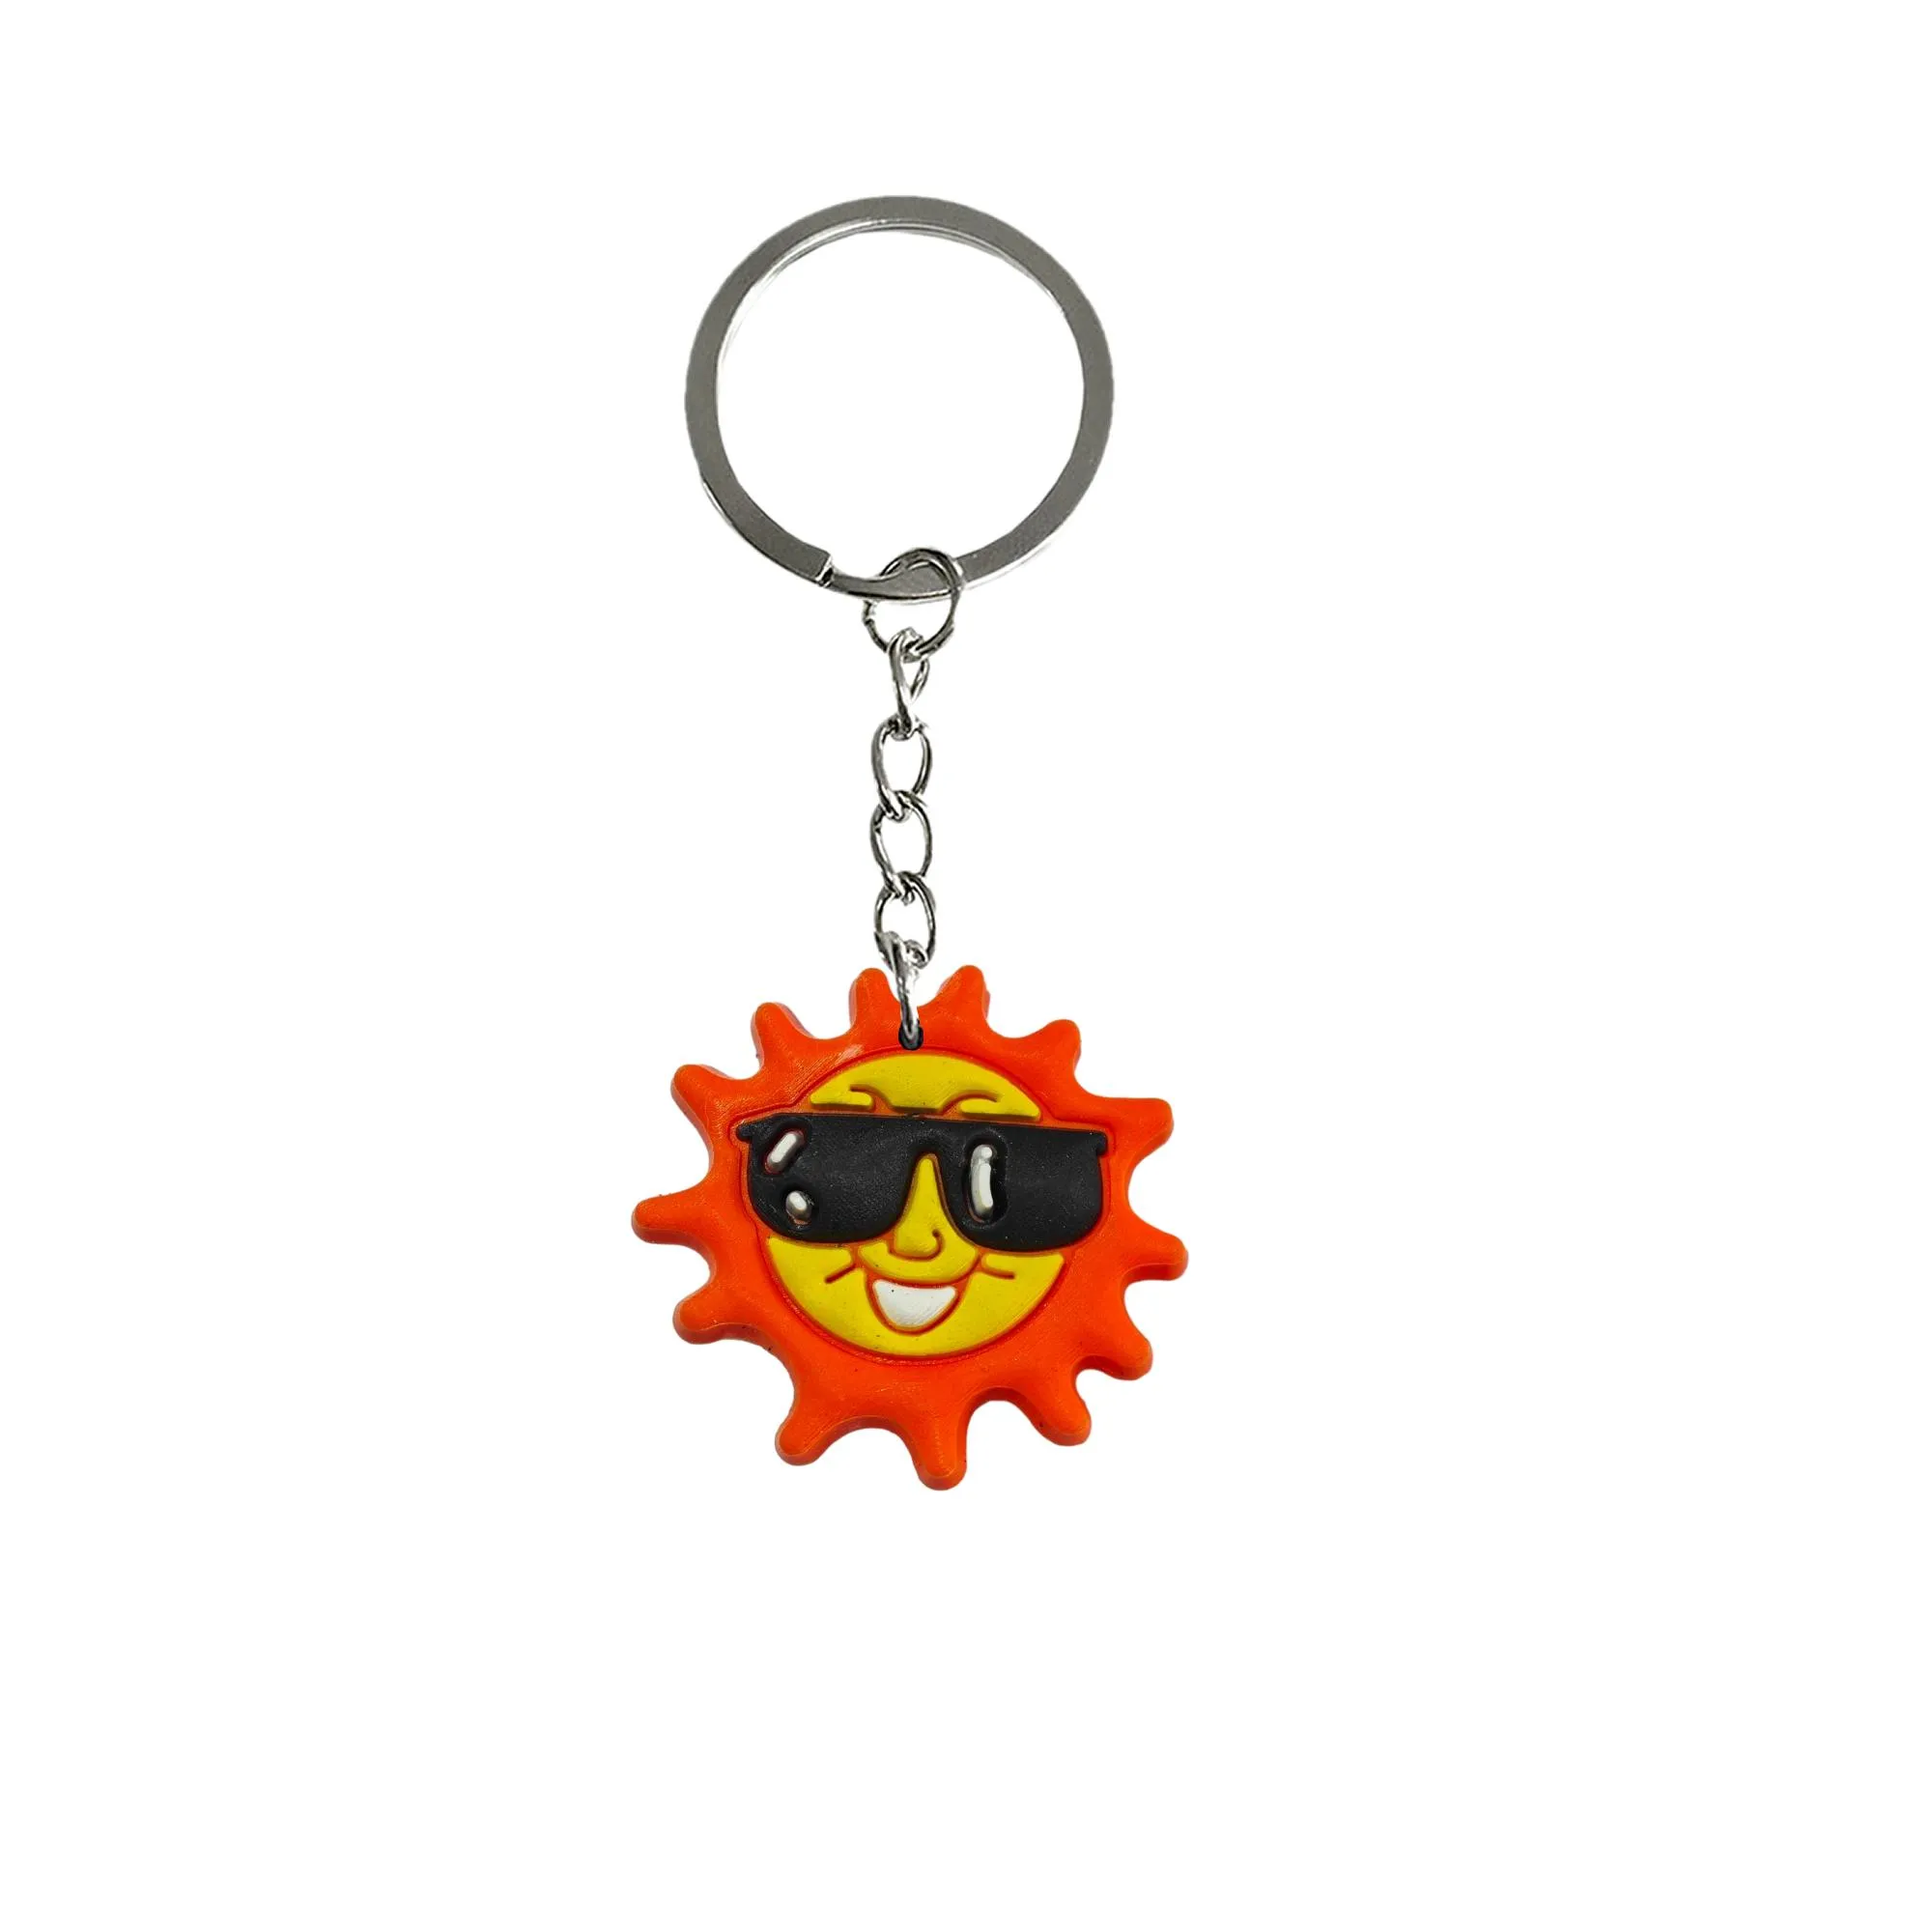 sun keychain keychains for women goodie bag stuffers supplies keyring backpacks suitable schoolbag boys backpack key chain kid boy girl party favors gift